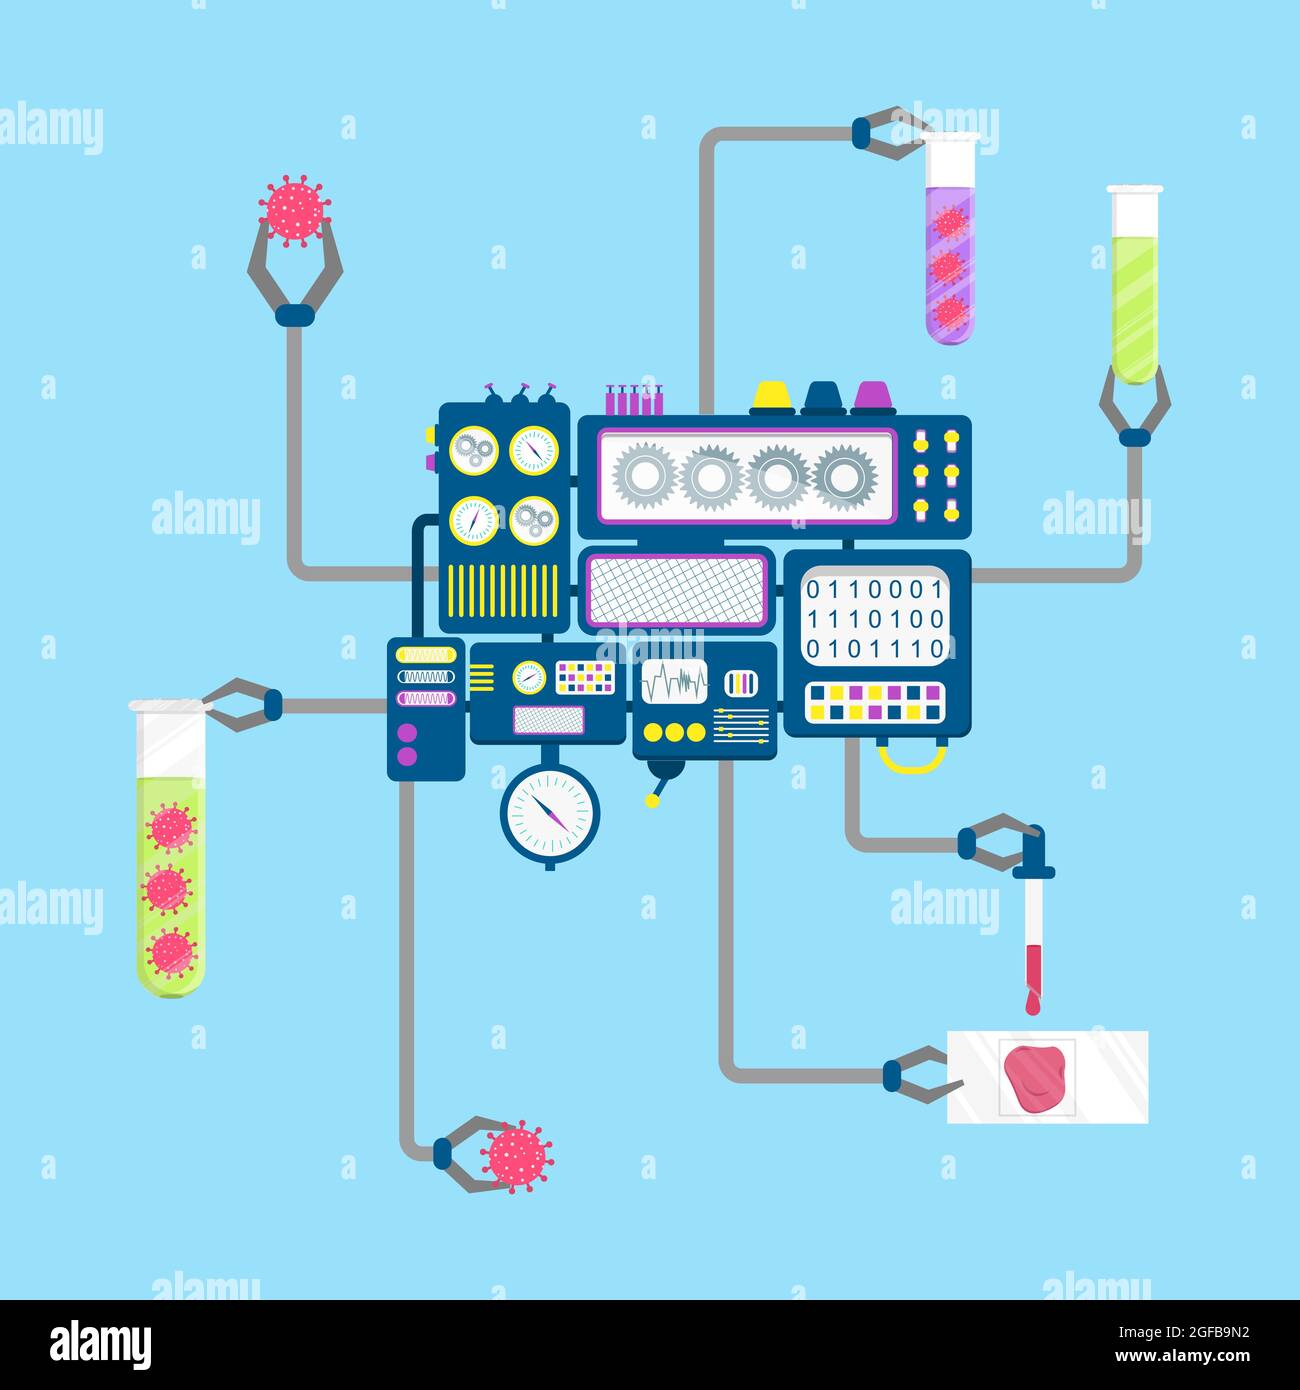 Machine with claws manipulating virus in laboratory. Sample in test tube and glass plate. Stock Vector